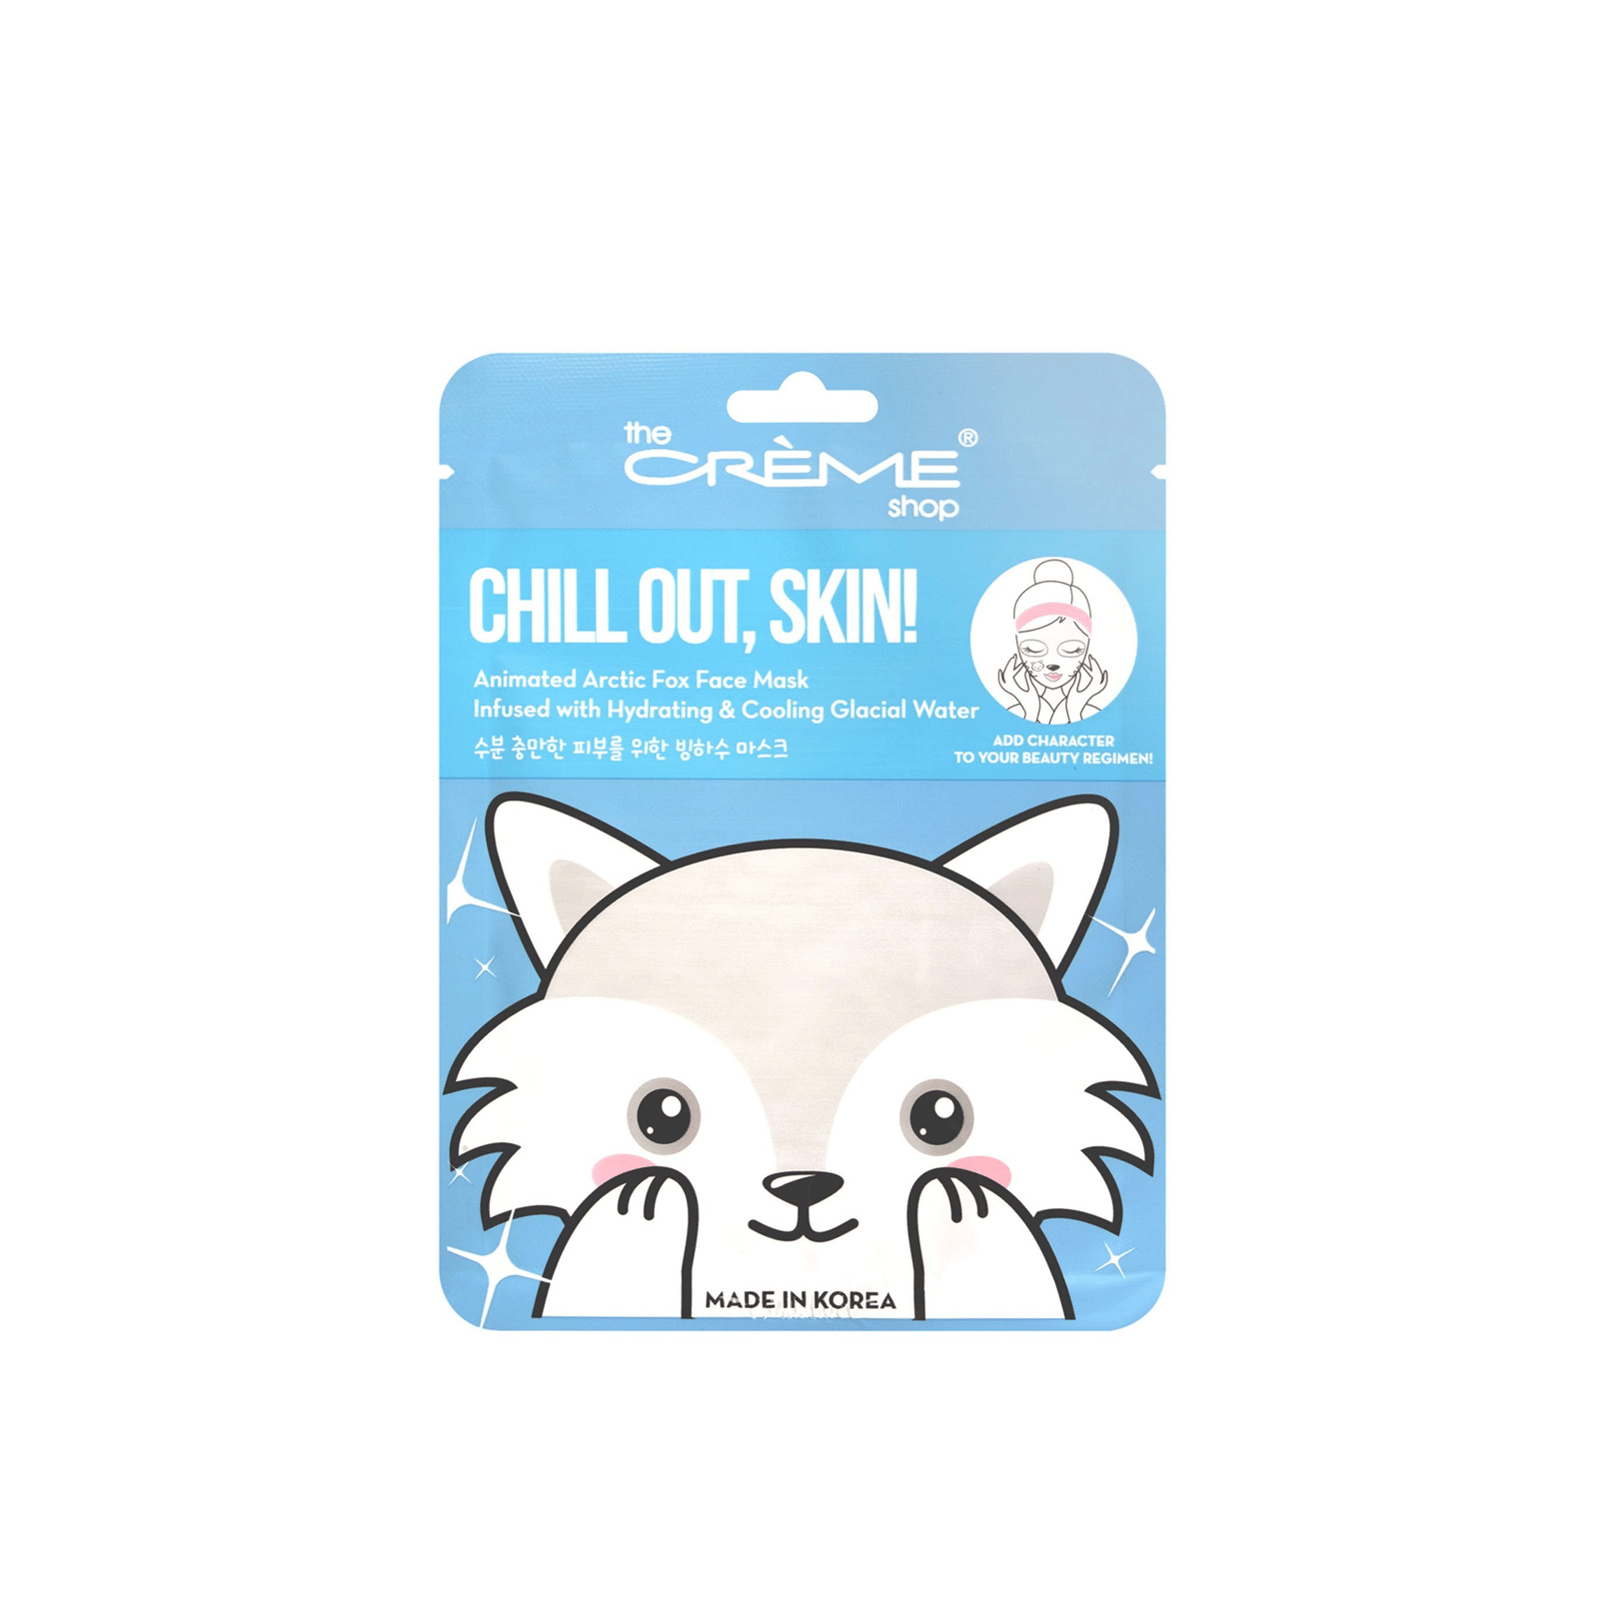 The Crème Shop Chill Out, Skin! Animated Arctic Fox Face Mask 25g (0.88 oz)